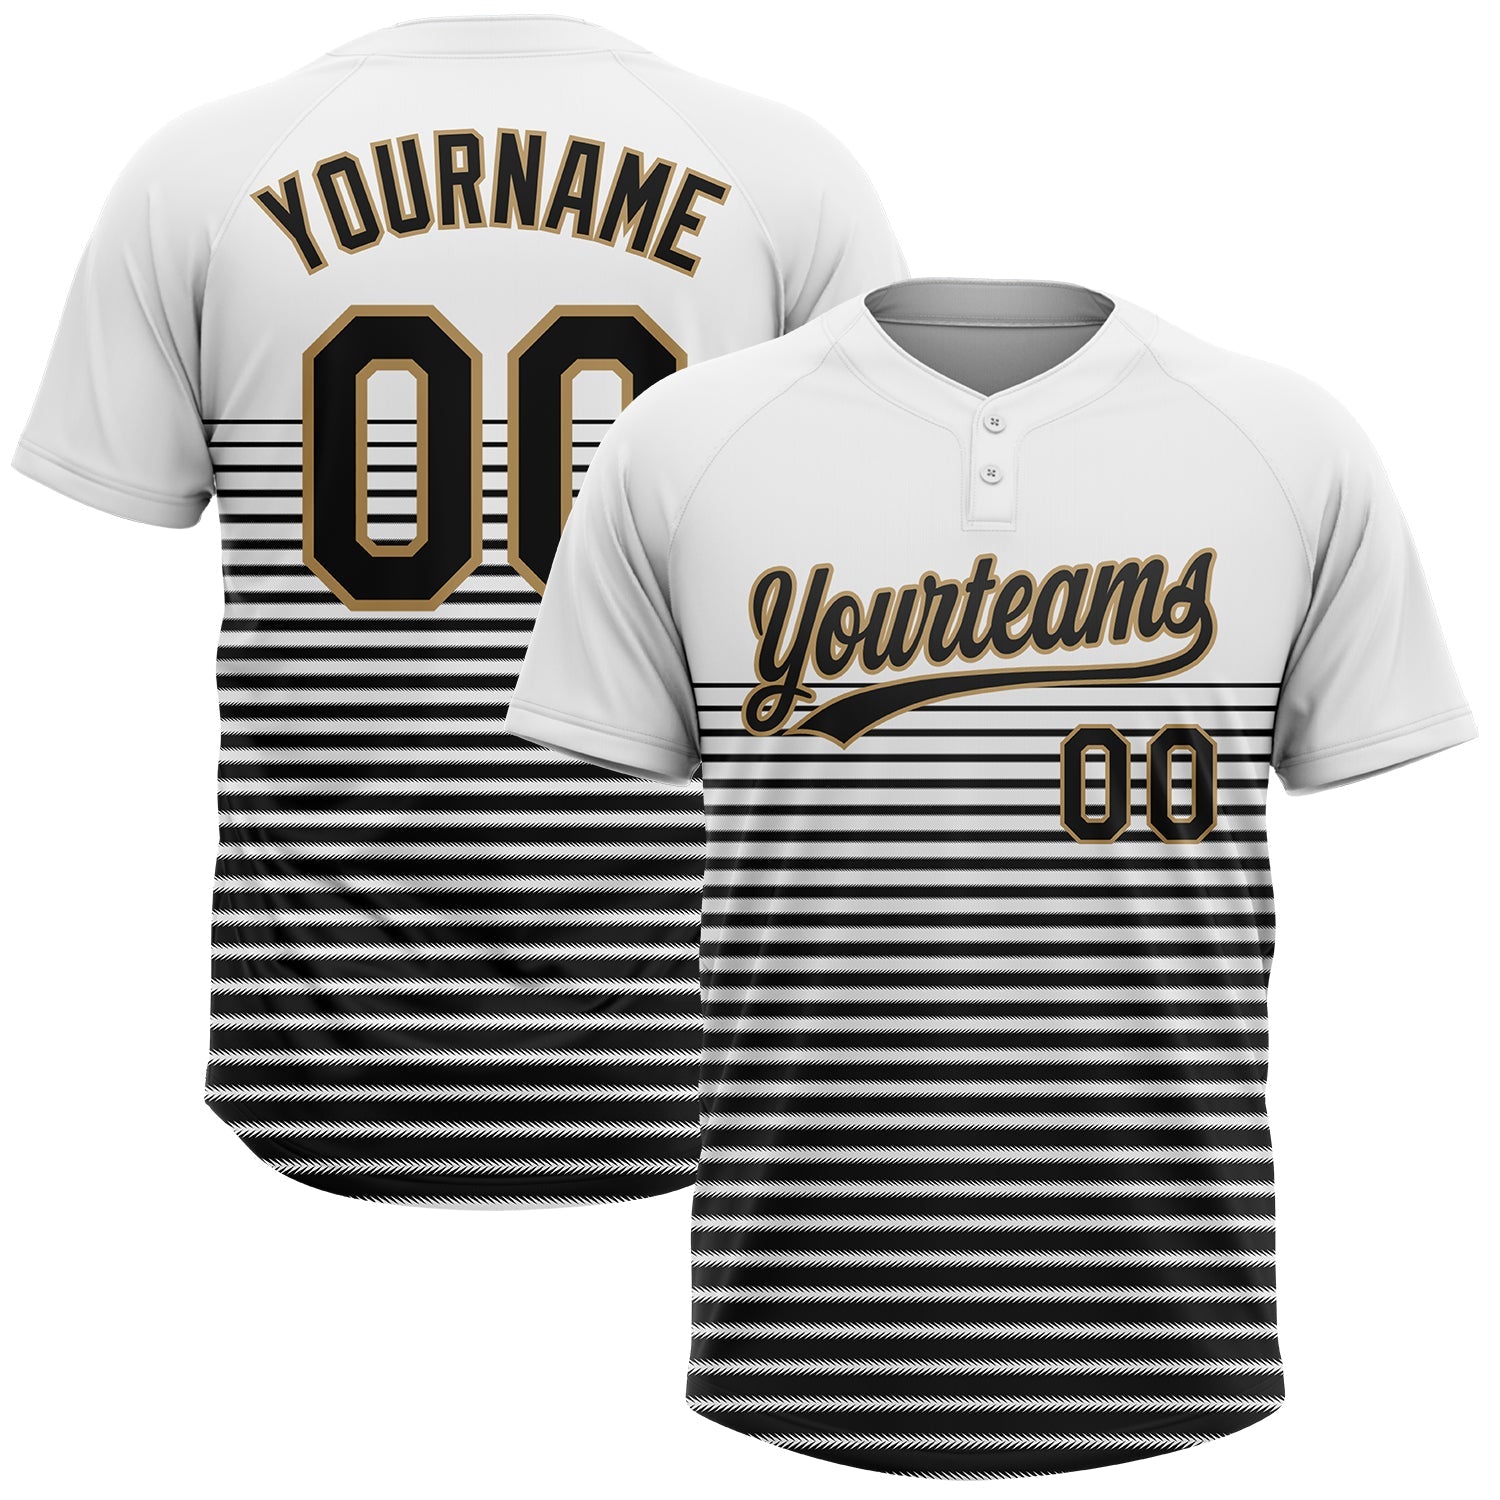 Custom Black Red-Old Gold Authentic Gradient Fashion Baseball Jersey